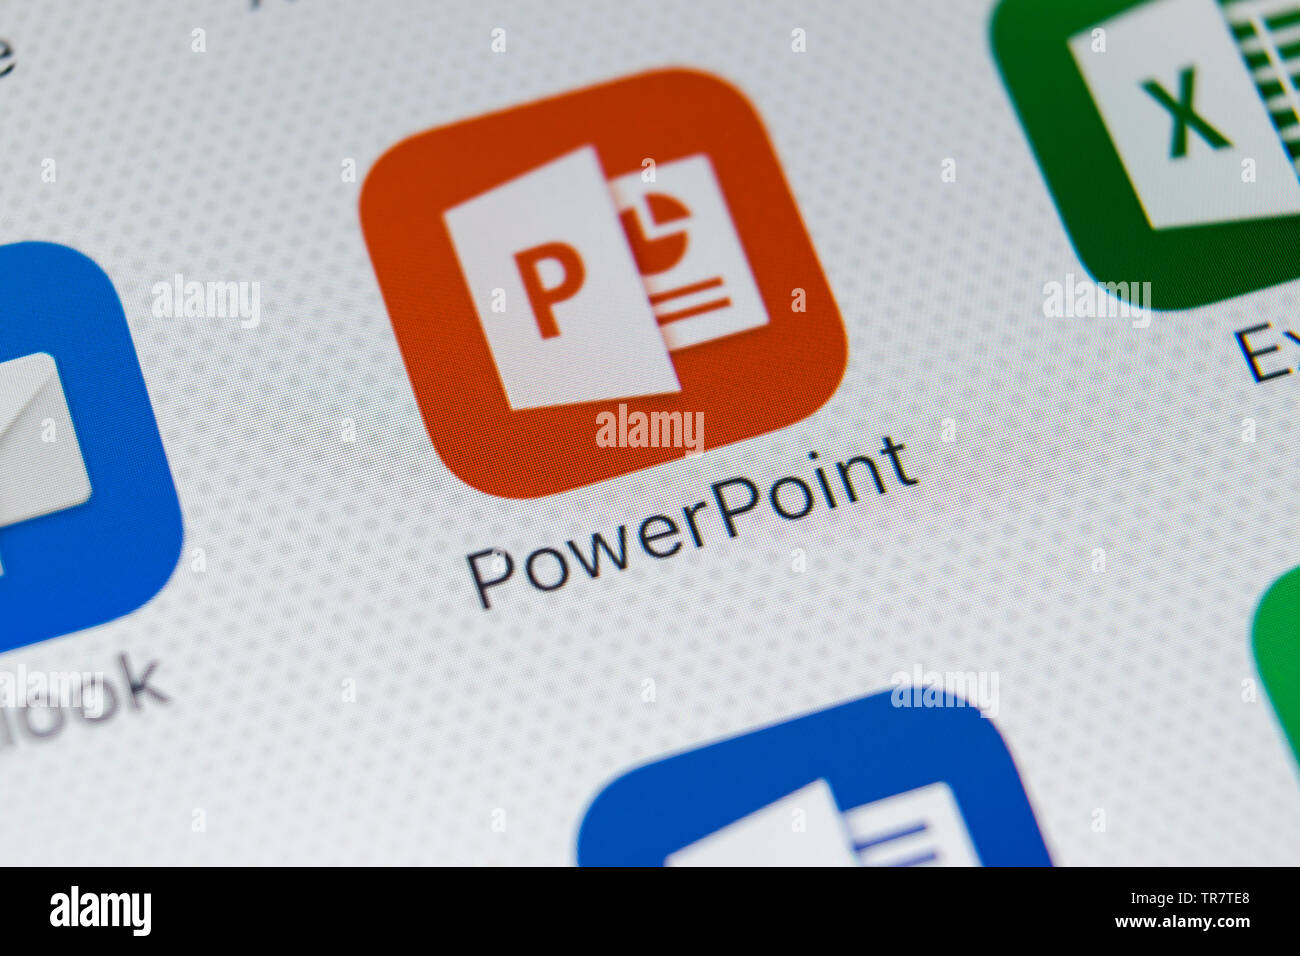 Sankt-Petersburg, Russia, February 28, 2018: Microsoft Powerpoint application icon on Apple iPhone X screen close-up. PowerPoint app icon. Microsoft P Stock Photo